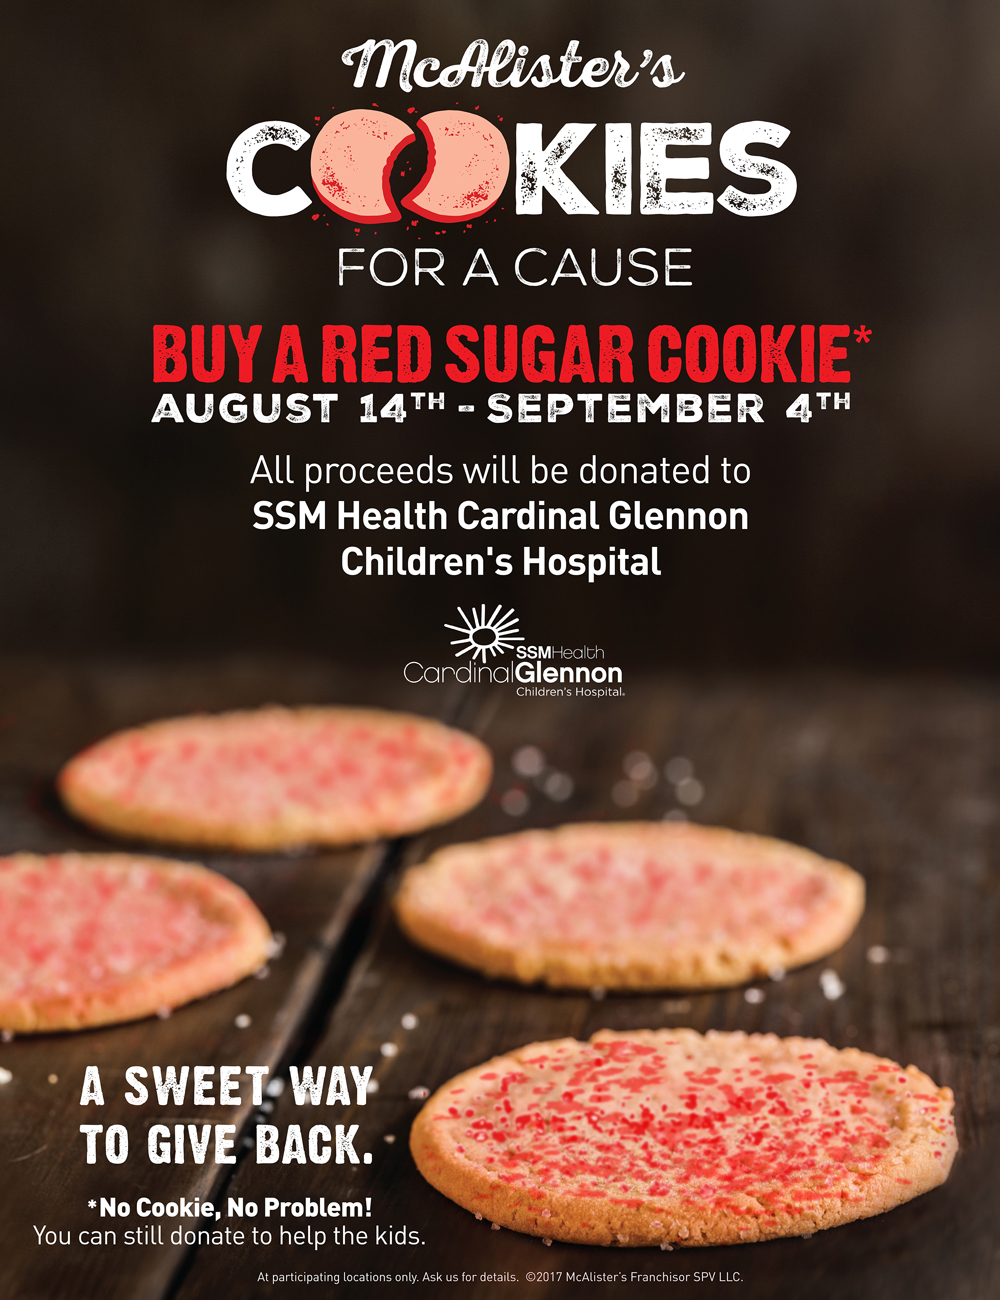 McAlister's Deli Cookies for a Cause - Cardinal Glennon